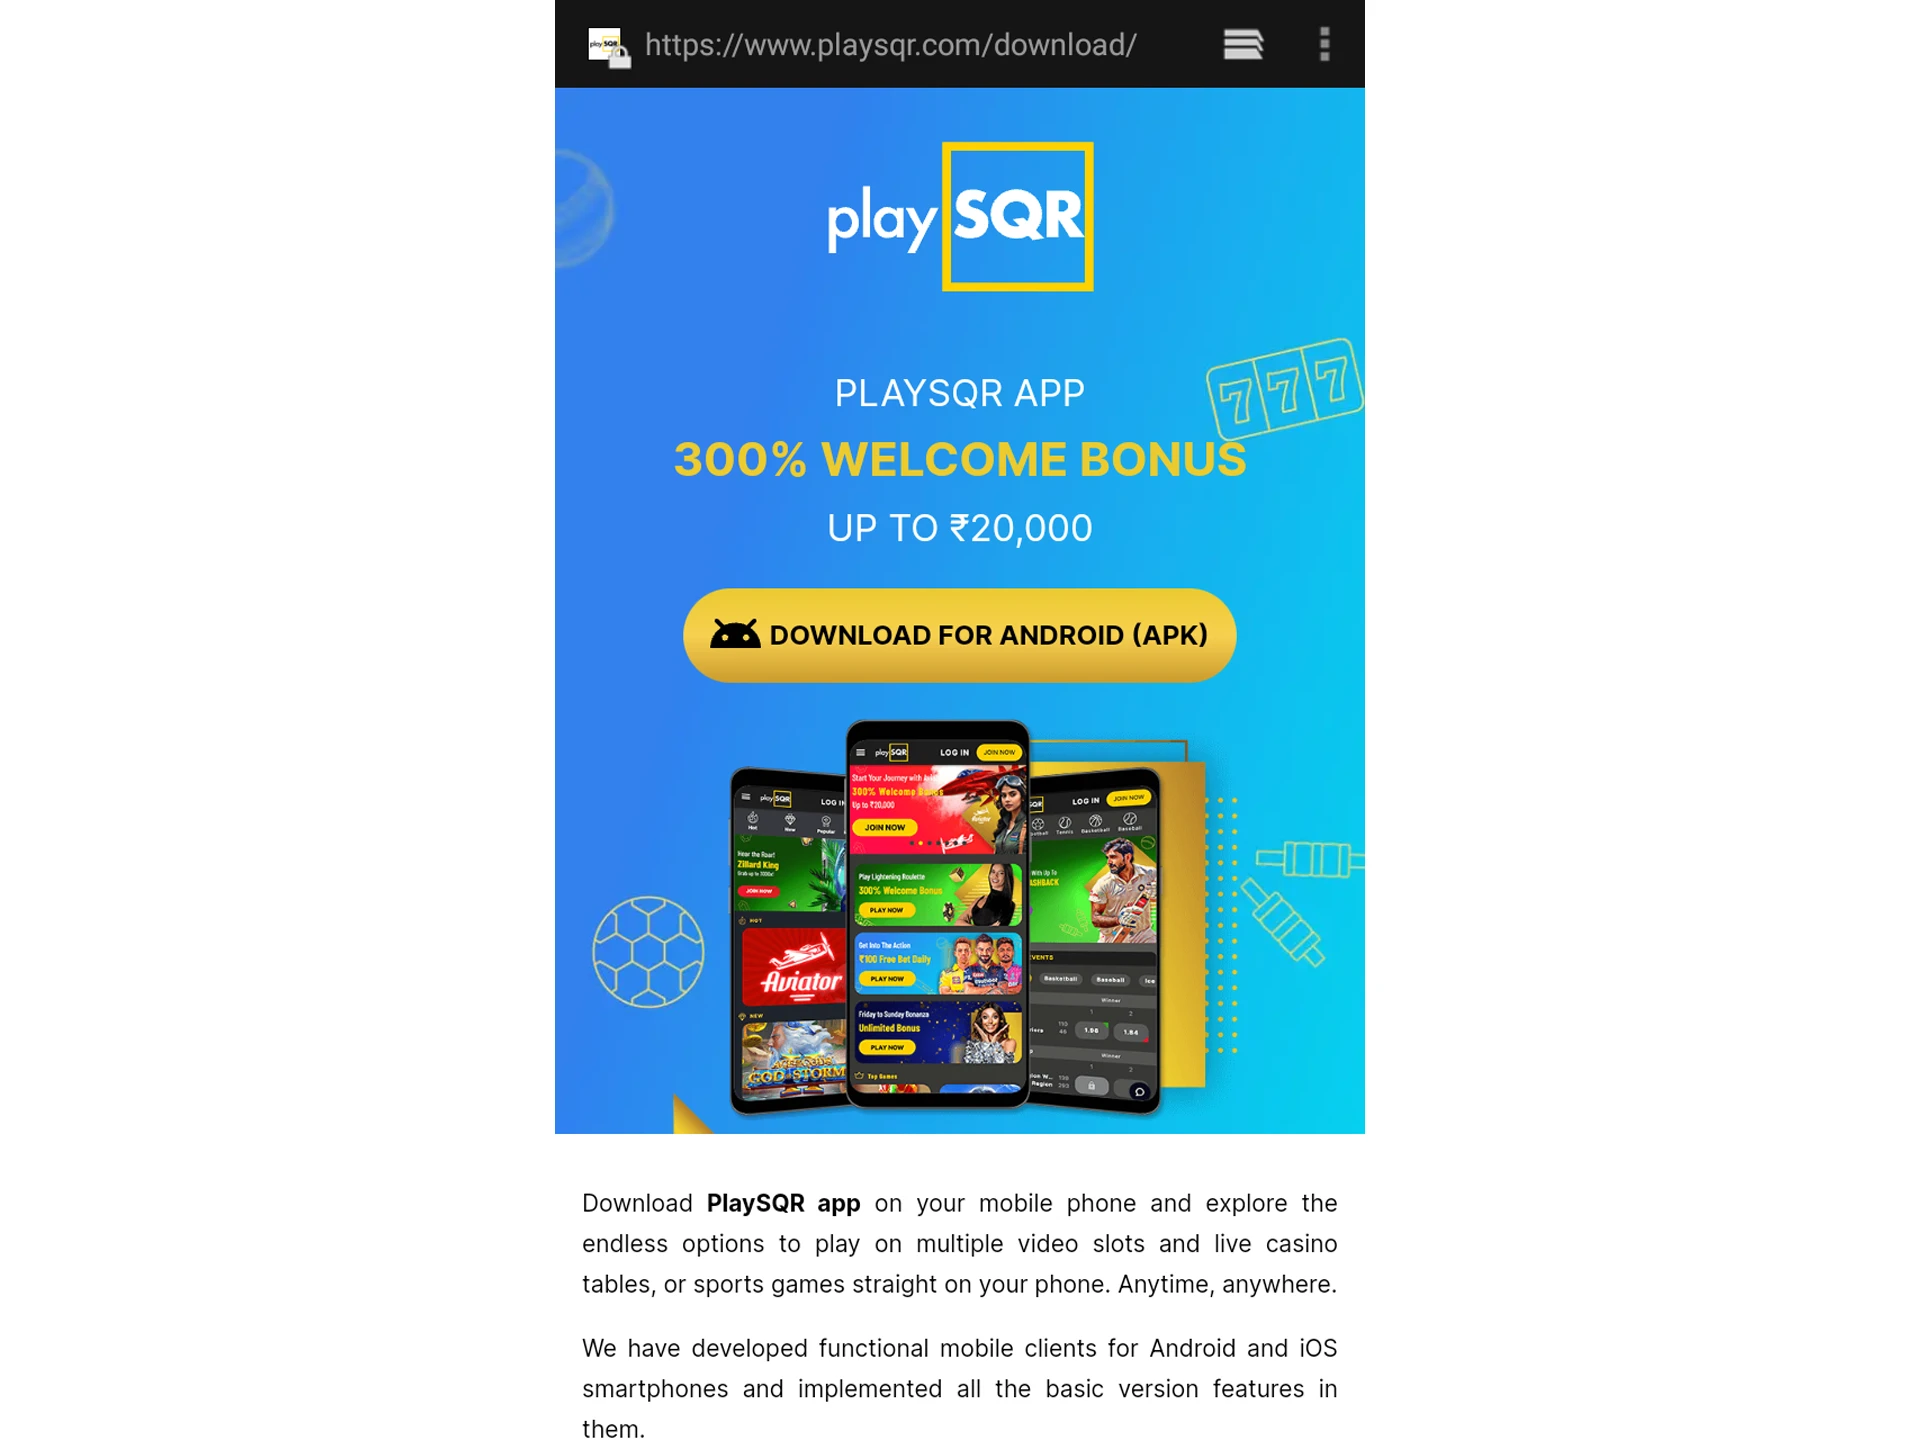 On the PlaySQR website, find the Mobile App section.